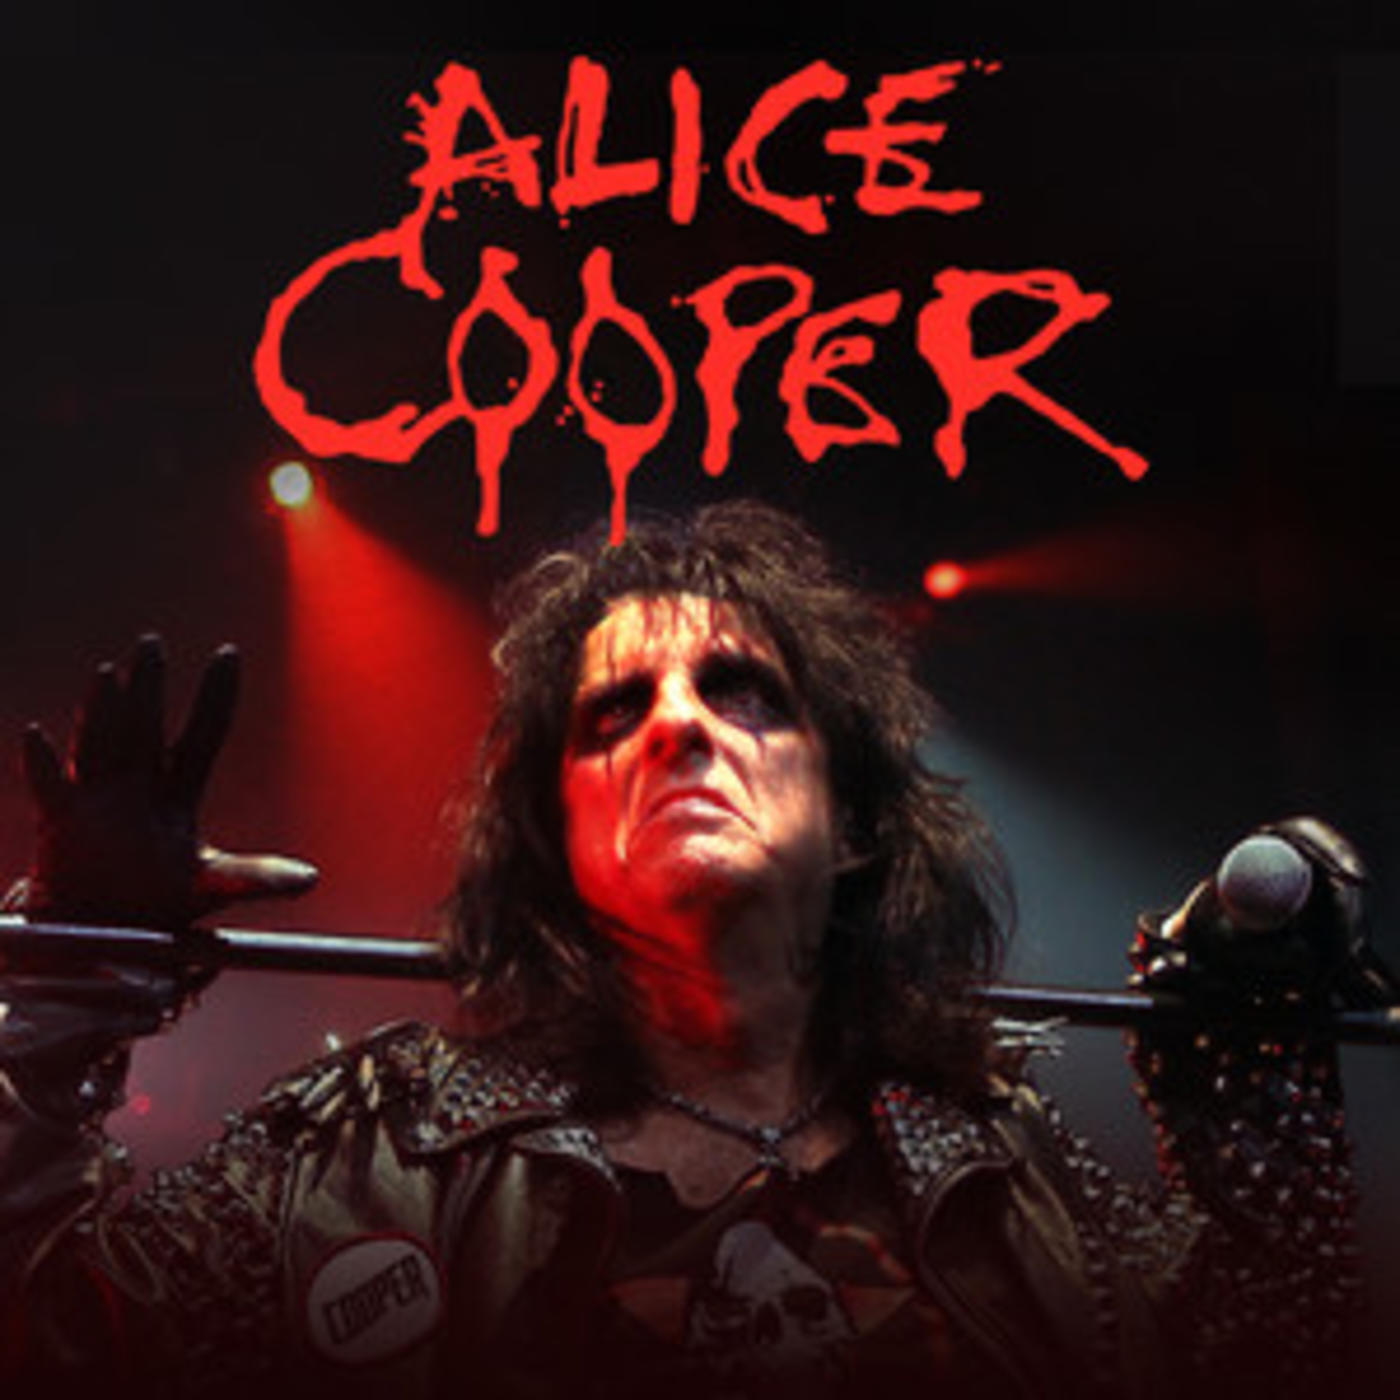 Official Alice Cooper Playlist - Poison, School's Out, No More Mr. Nice Guy, I'm Eighteen, Feed My Frankenstein, Hey Stoopid, Welcome to my Nightmare